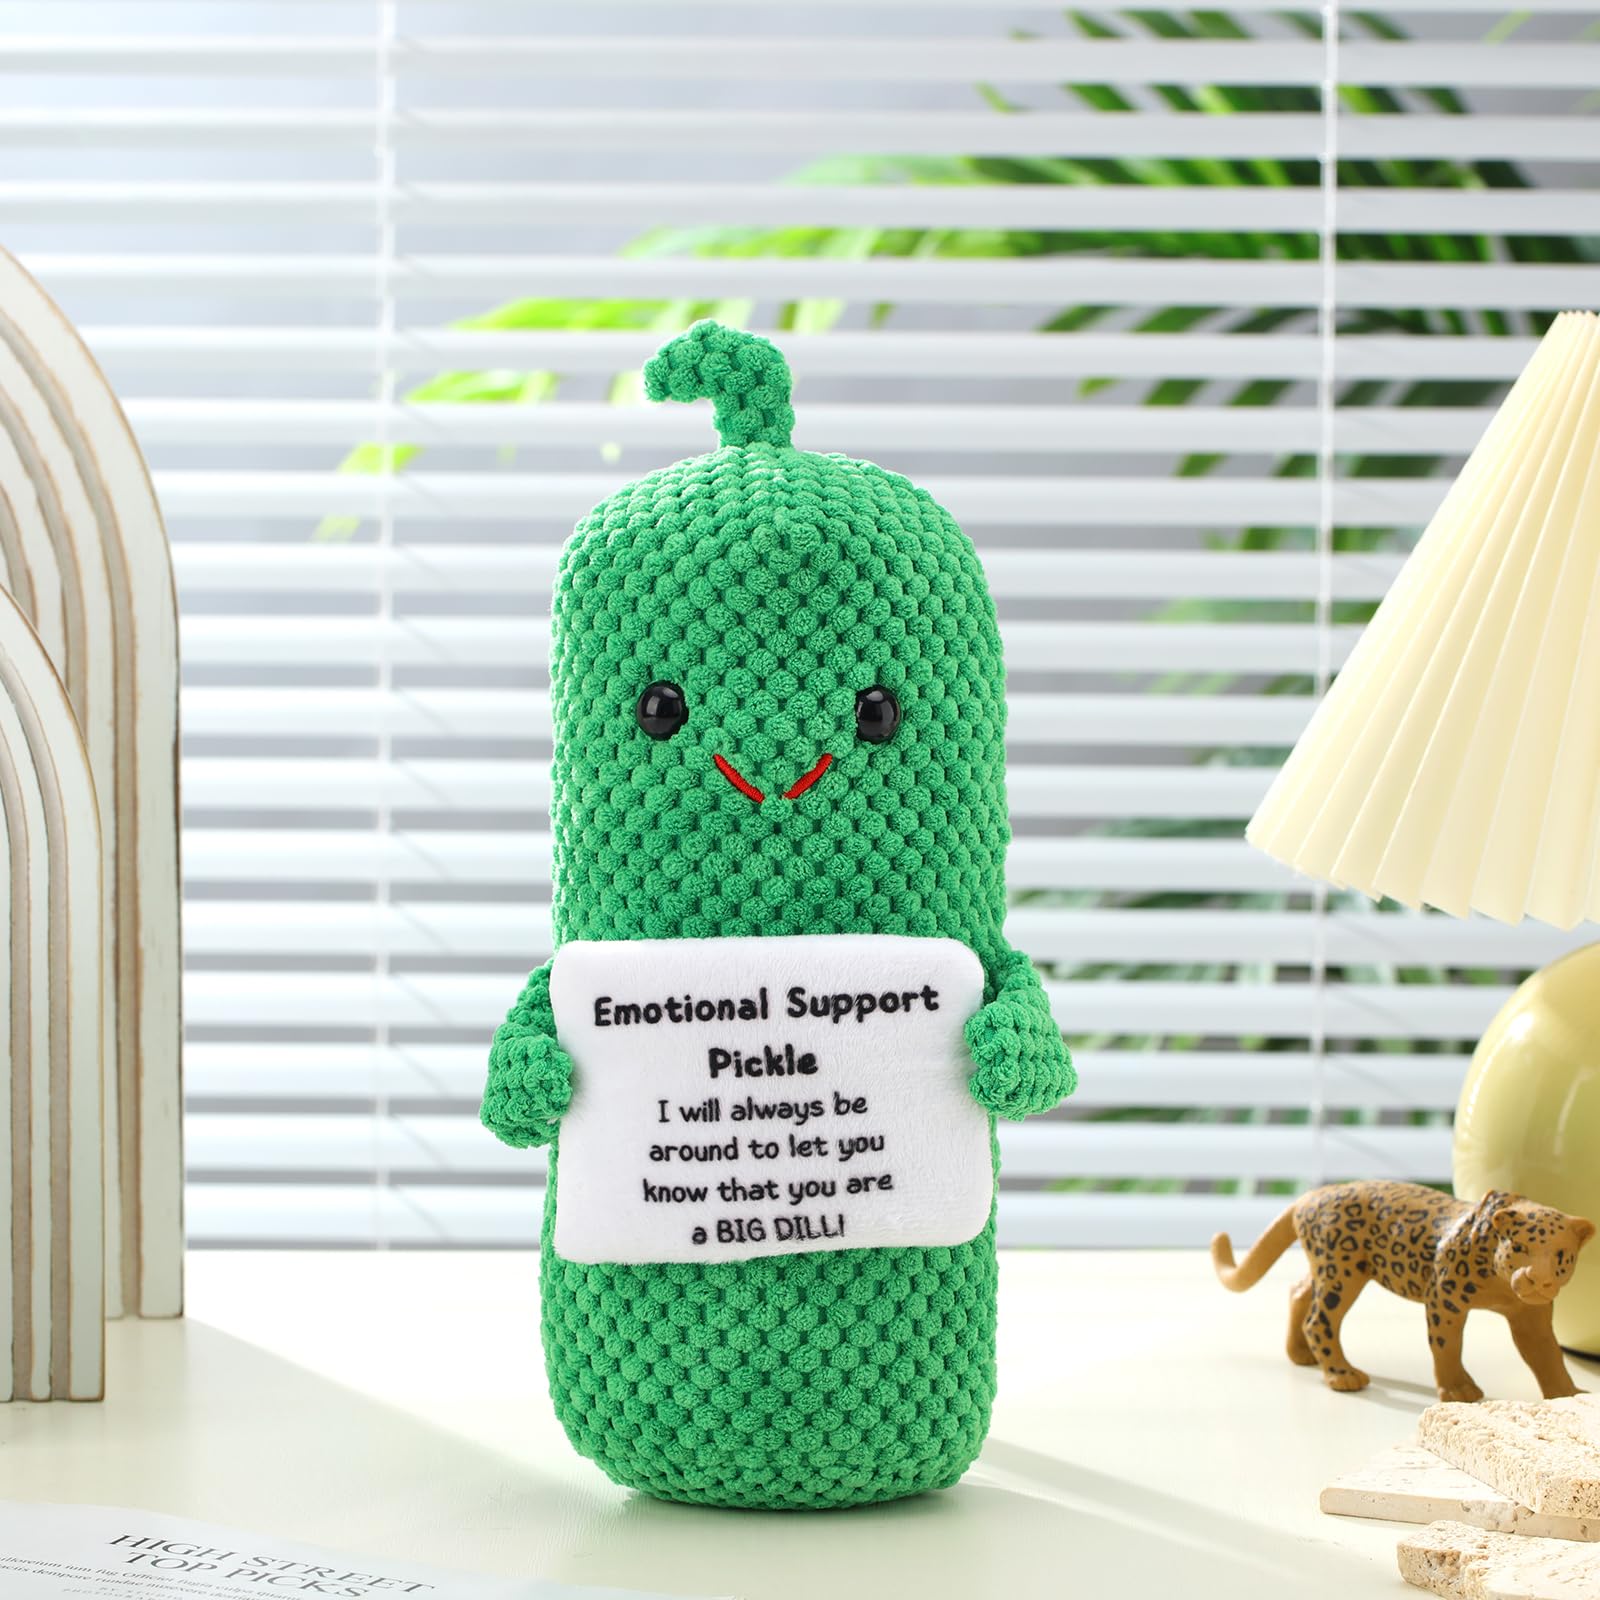 Silipull 9.8 Inch Large Emotional Support Pickled Cucumber Gift, Big Dill Positive Pickle Crochet Funny Emotional Support Plush Doll Cute Positive Pickle Encouragement Gifts for Friends